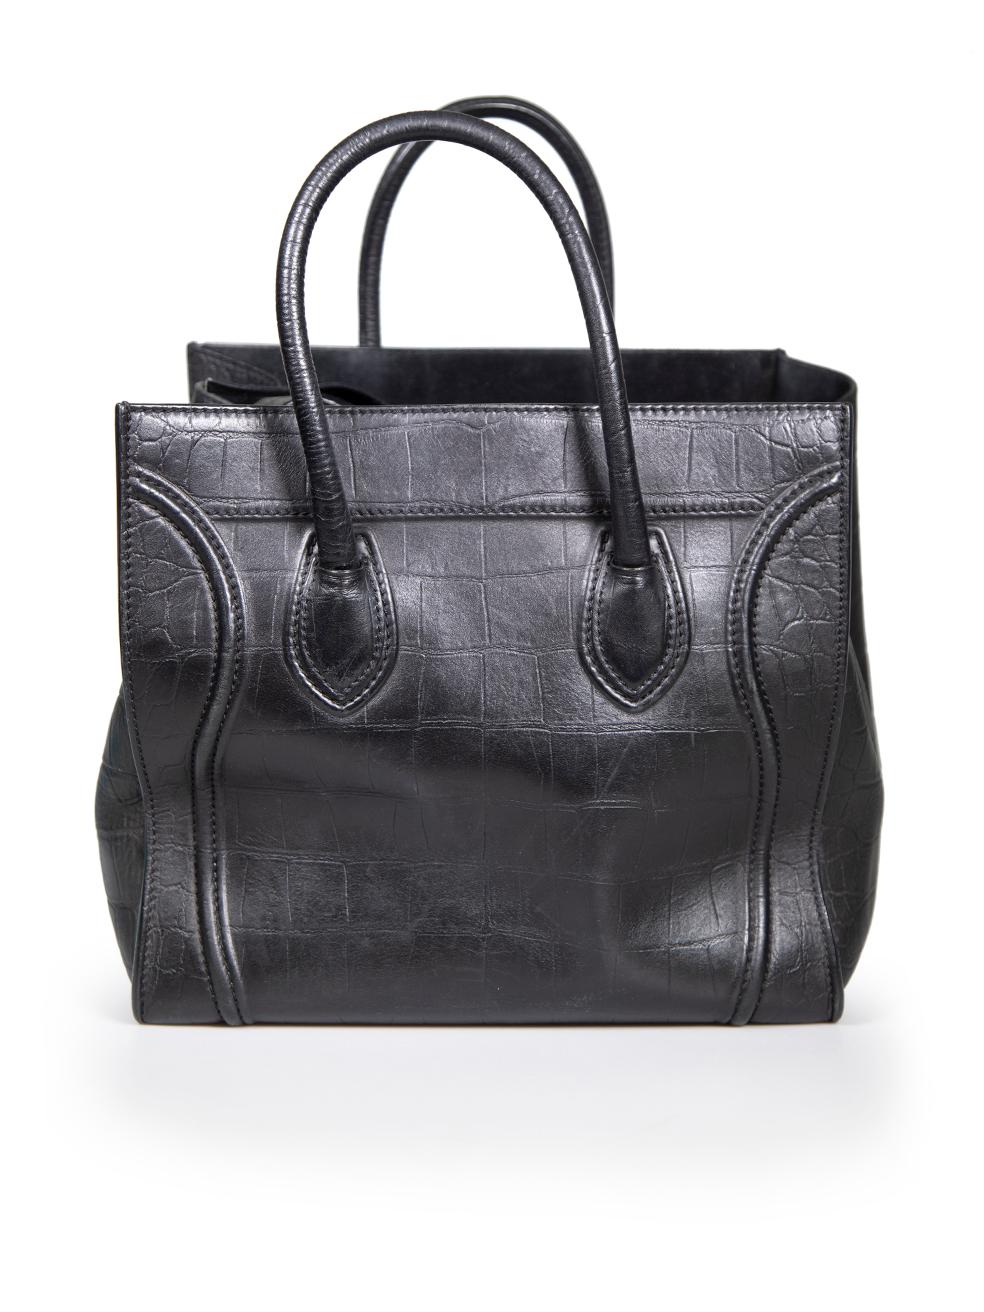 Céline Black Croc Embossed Leather Mini Phantom Luggage Tote In Good Condition For Sale In London, GB